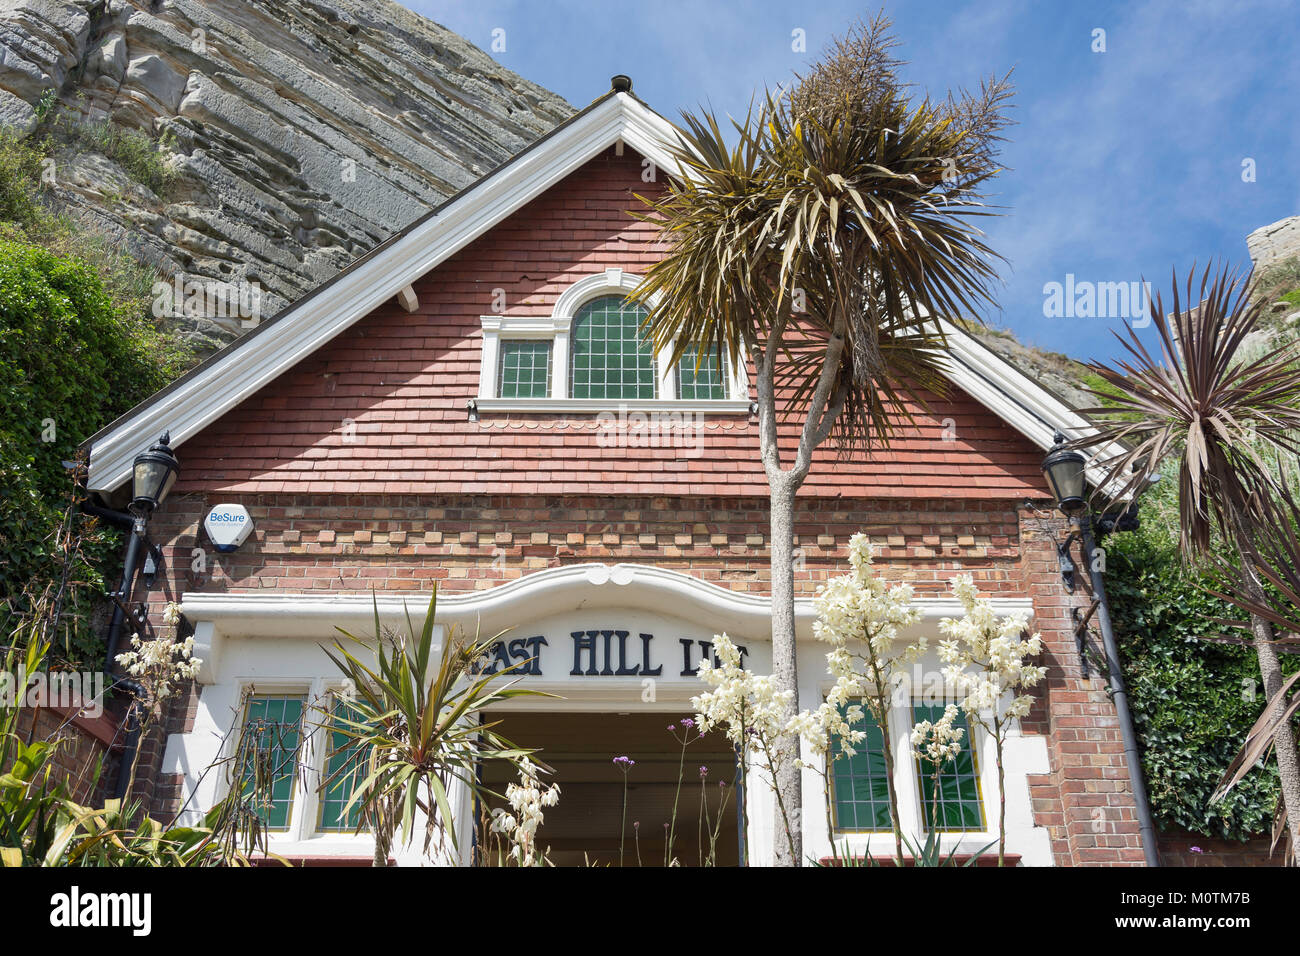 Entrance to East Hill Lift Railway, Rock-A-Nore Road, Hastings, East Sussex, England, United Kingdom Stock Photo